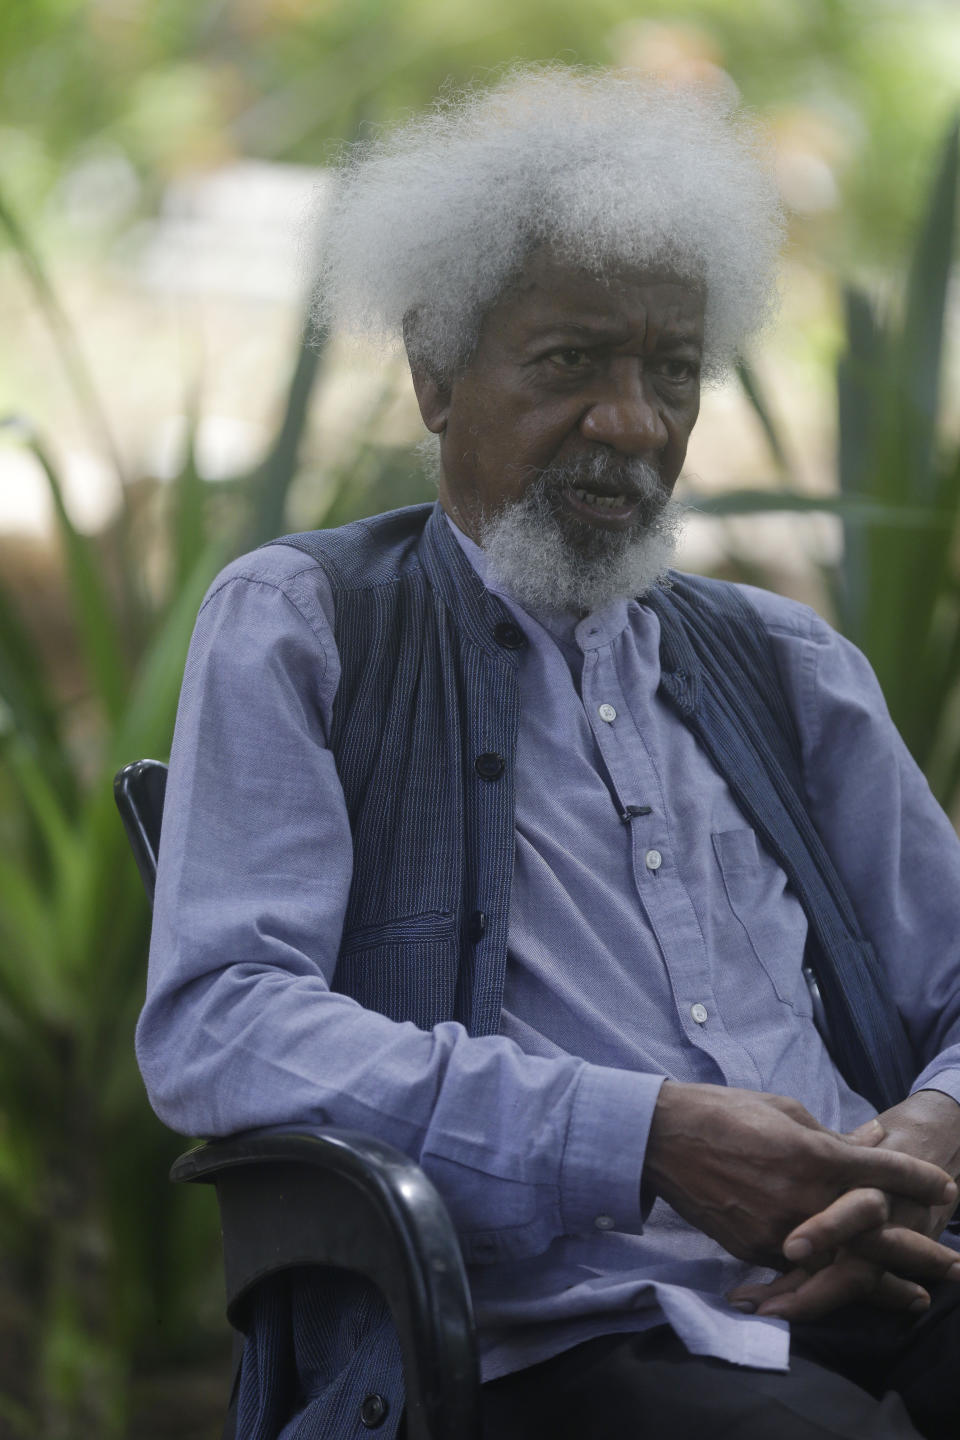 Nobel Laureate Wole Soyinka, speaks to The Associated Press during an interview at freedom park in Lagos, Nigeria, Thursday, Oct. 28, 2021. Wole Soyinka, Nigeria's Nobel-winning author, sees his country's many problems — misgoverning politicians, systemic corruption, violent extremists, and kidnapping bandits — yet he does not despair. At 87, he says Nigeria's youth may have the energy and the know-how to get the troubled country back on track. He says Nigeria needs a "brutal" soul-searching and a leader who will "take the bull by the horns" for things to improve. (AP Photo/Sunday Alamba)